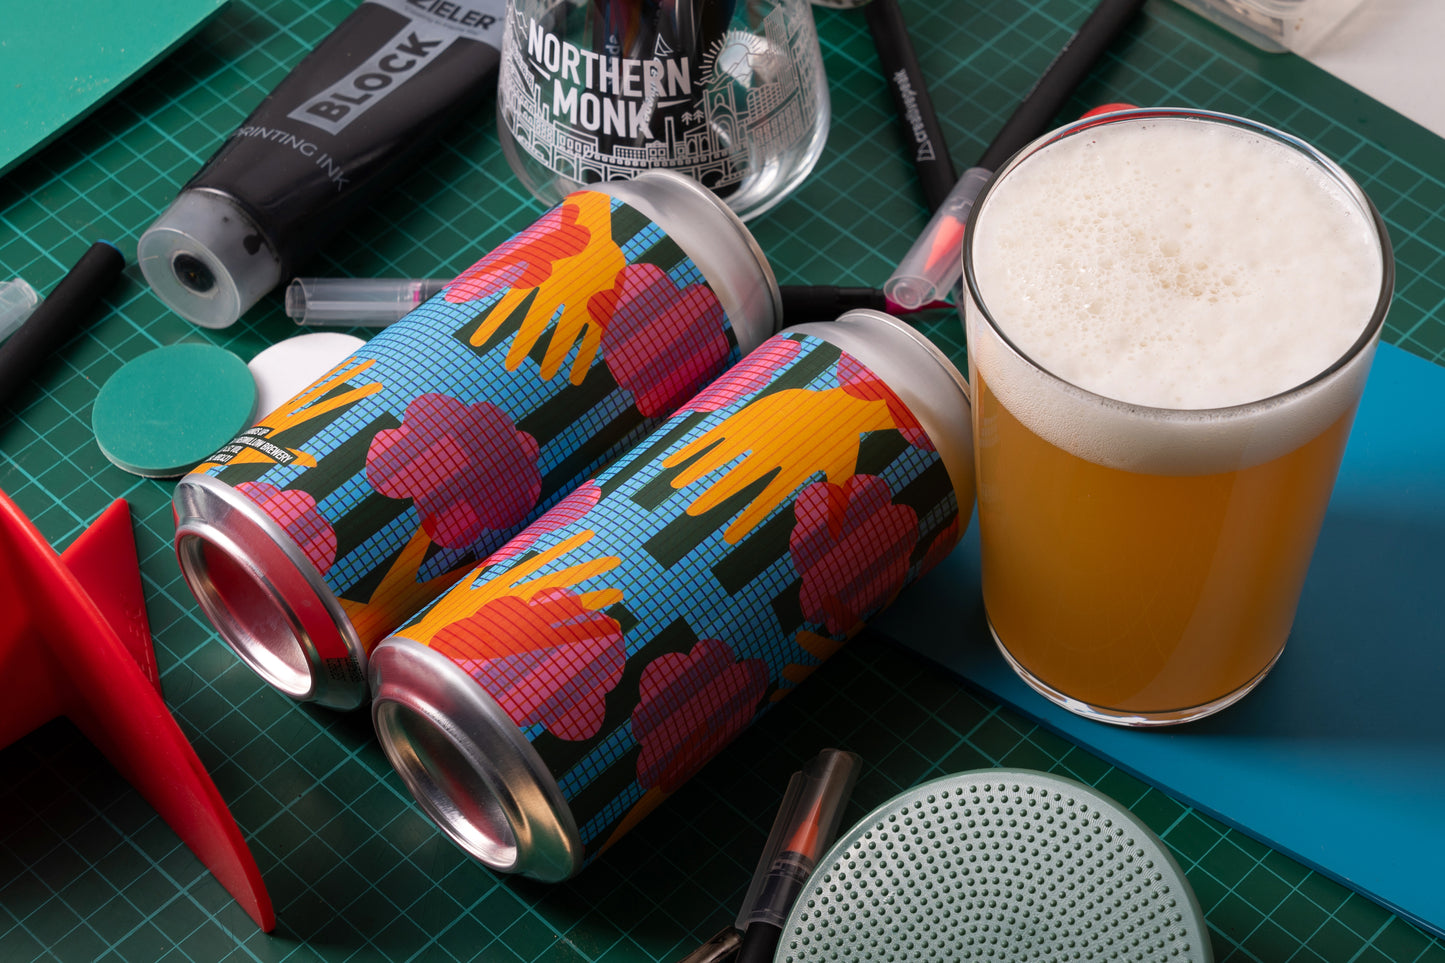 4 PACK // 35.04 RISOTTO STUDIOS // HANDS UP // REDWILLOW // SESSION IPA